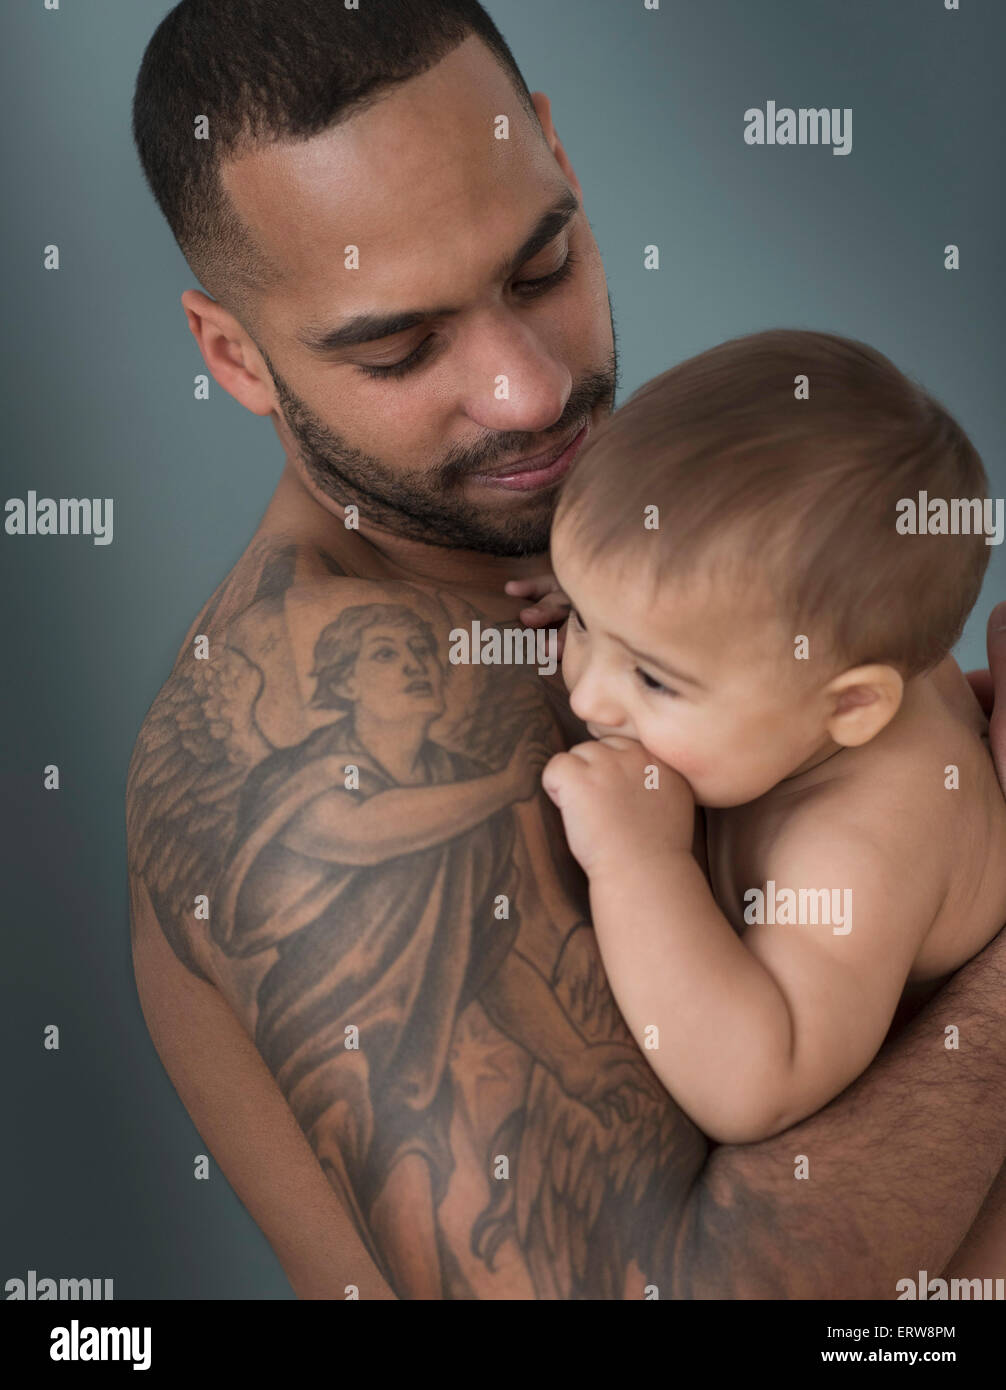 Father with tattoos holding baby son Stock Photo - Alamy